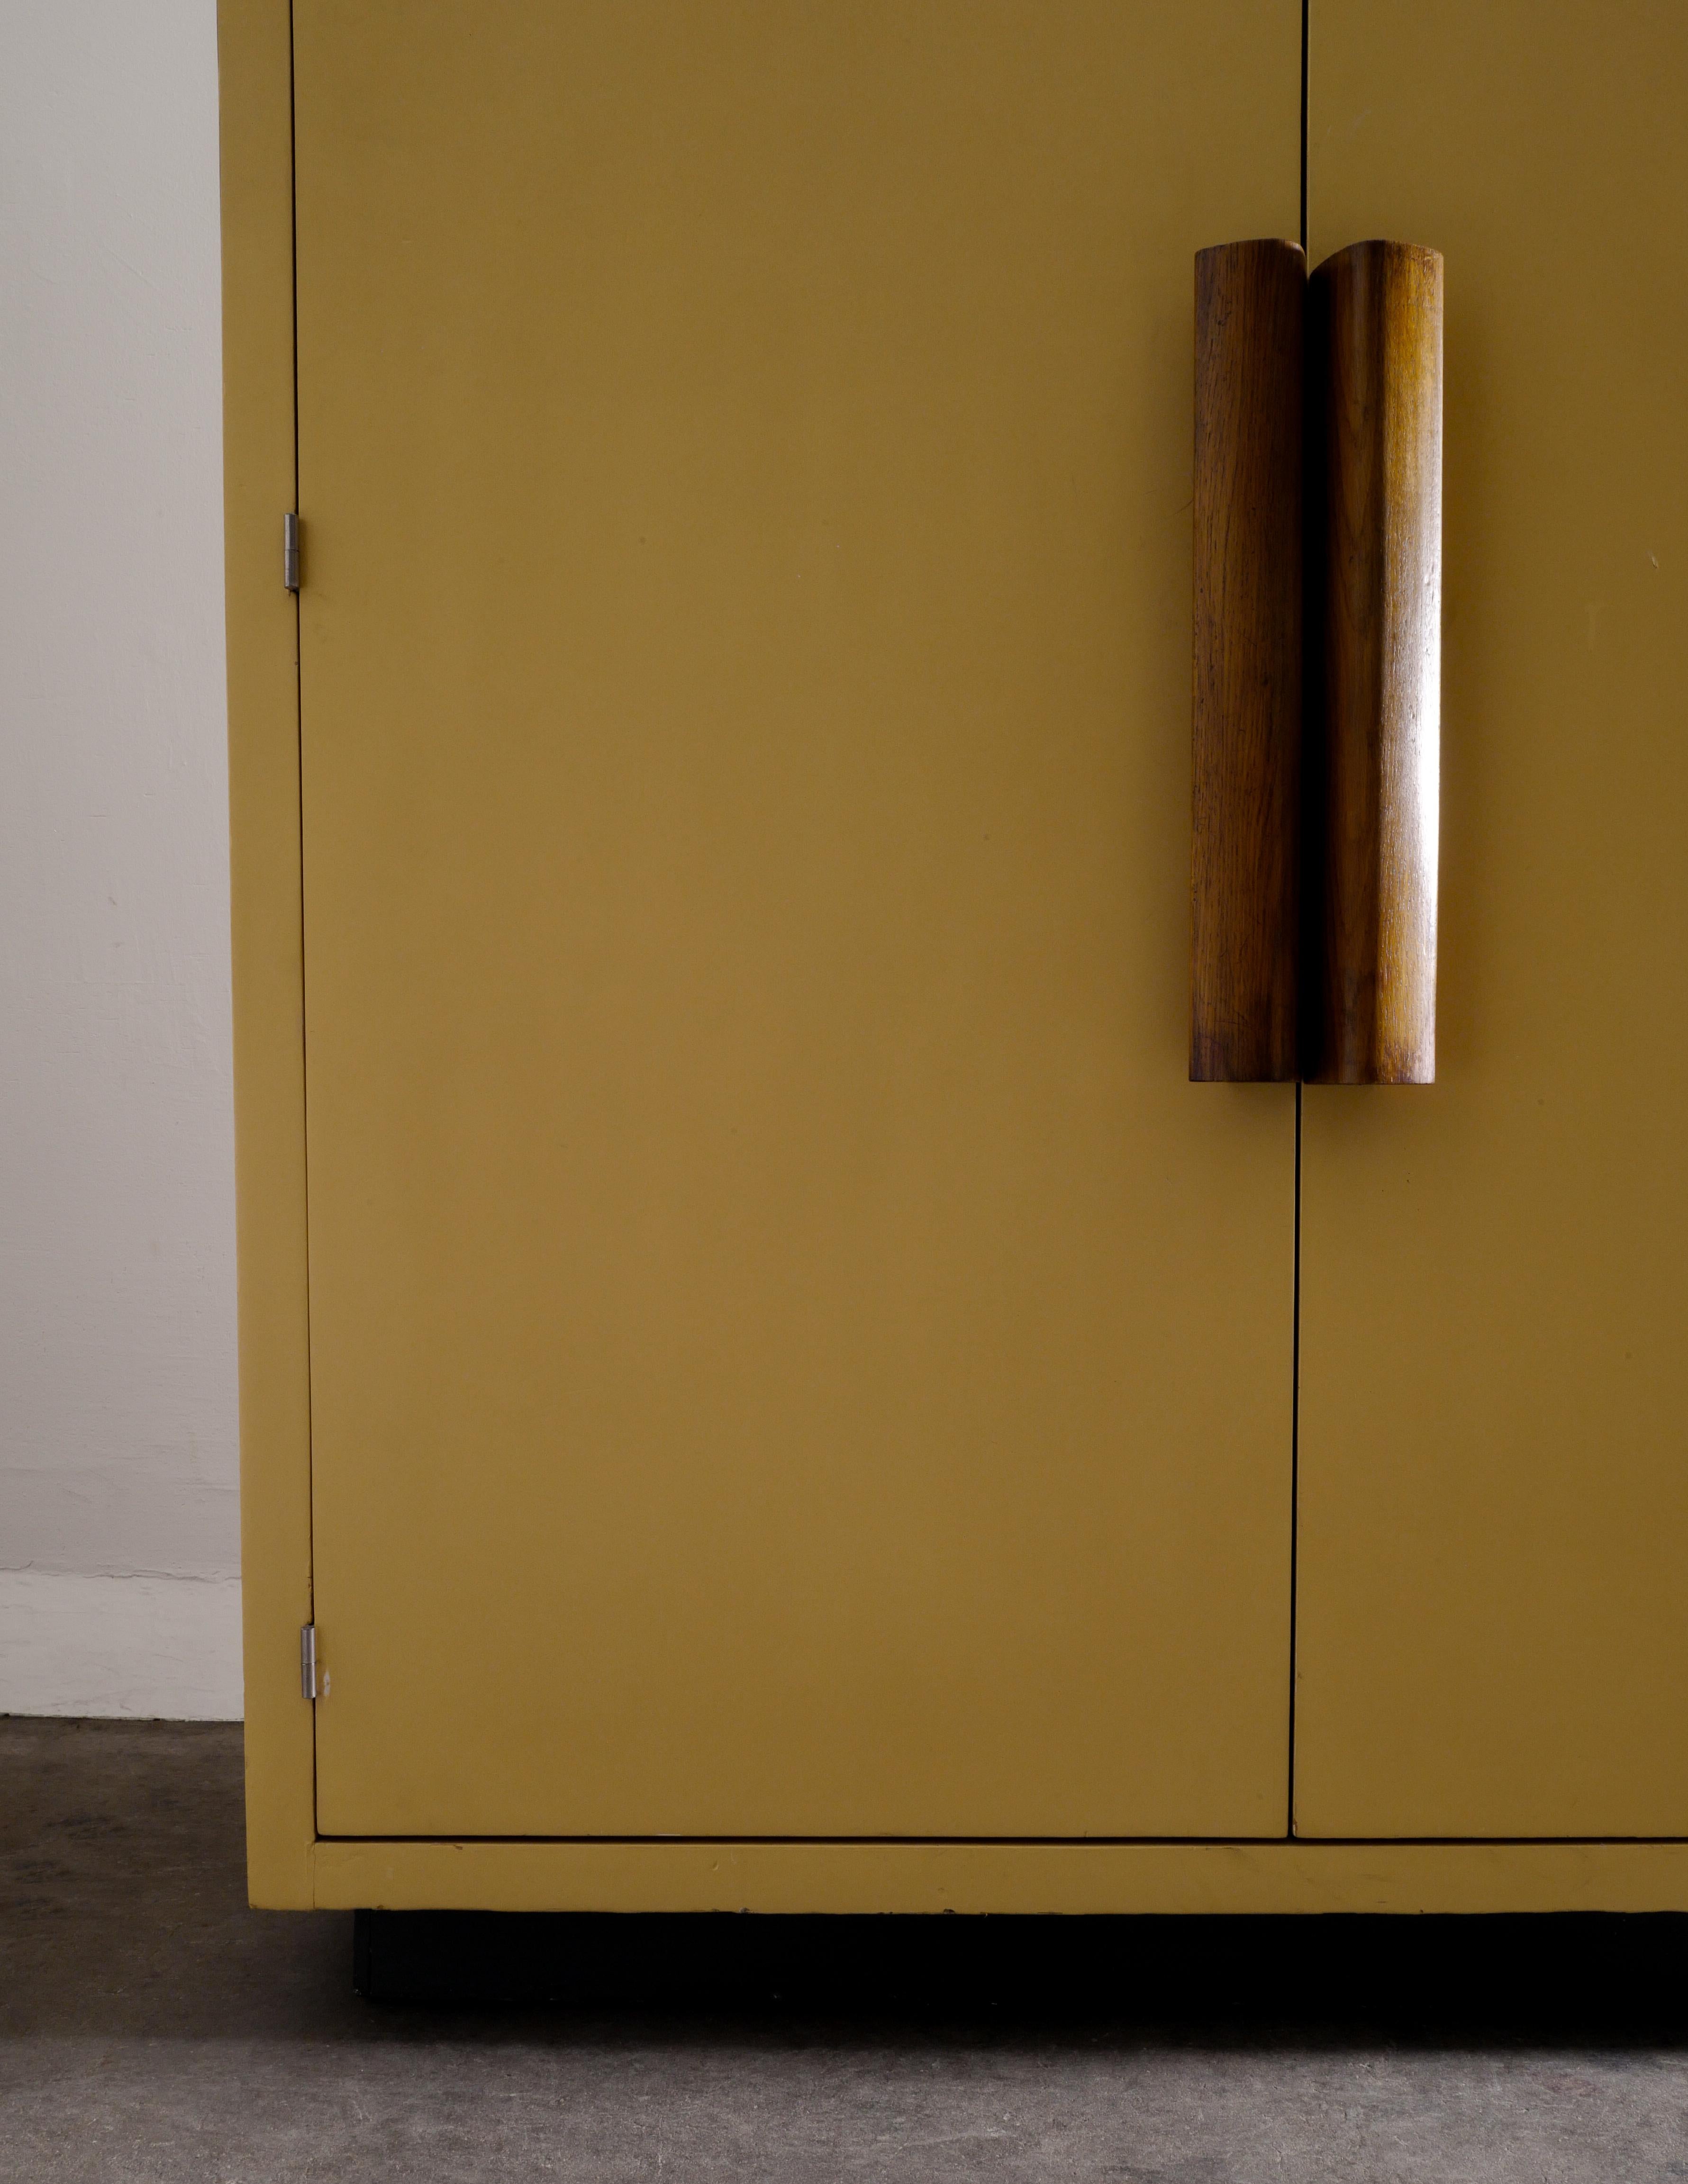 Mid-Century Modern Le Corbusier Wooden Midcentury Dresser / Wardrobe Produced in Marseille, 1949 For Sale